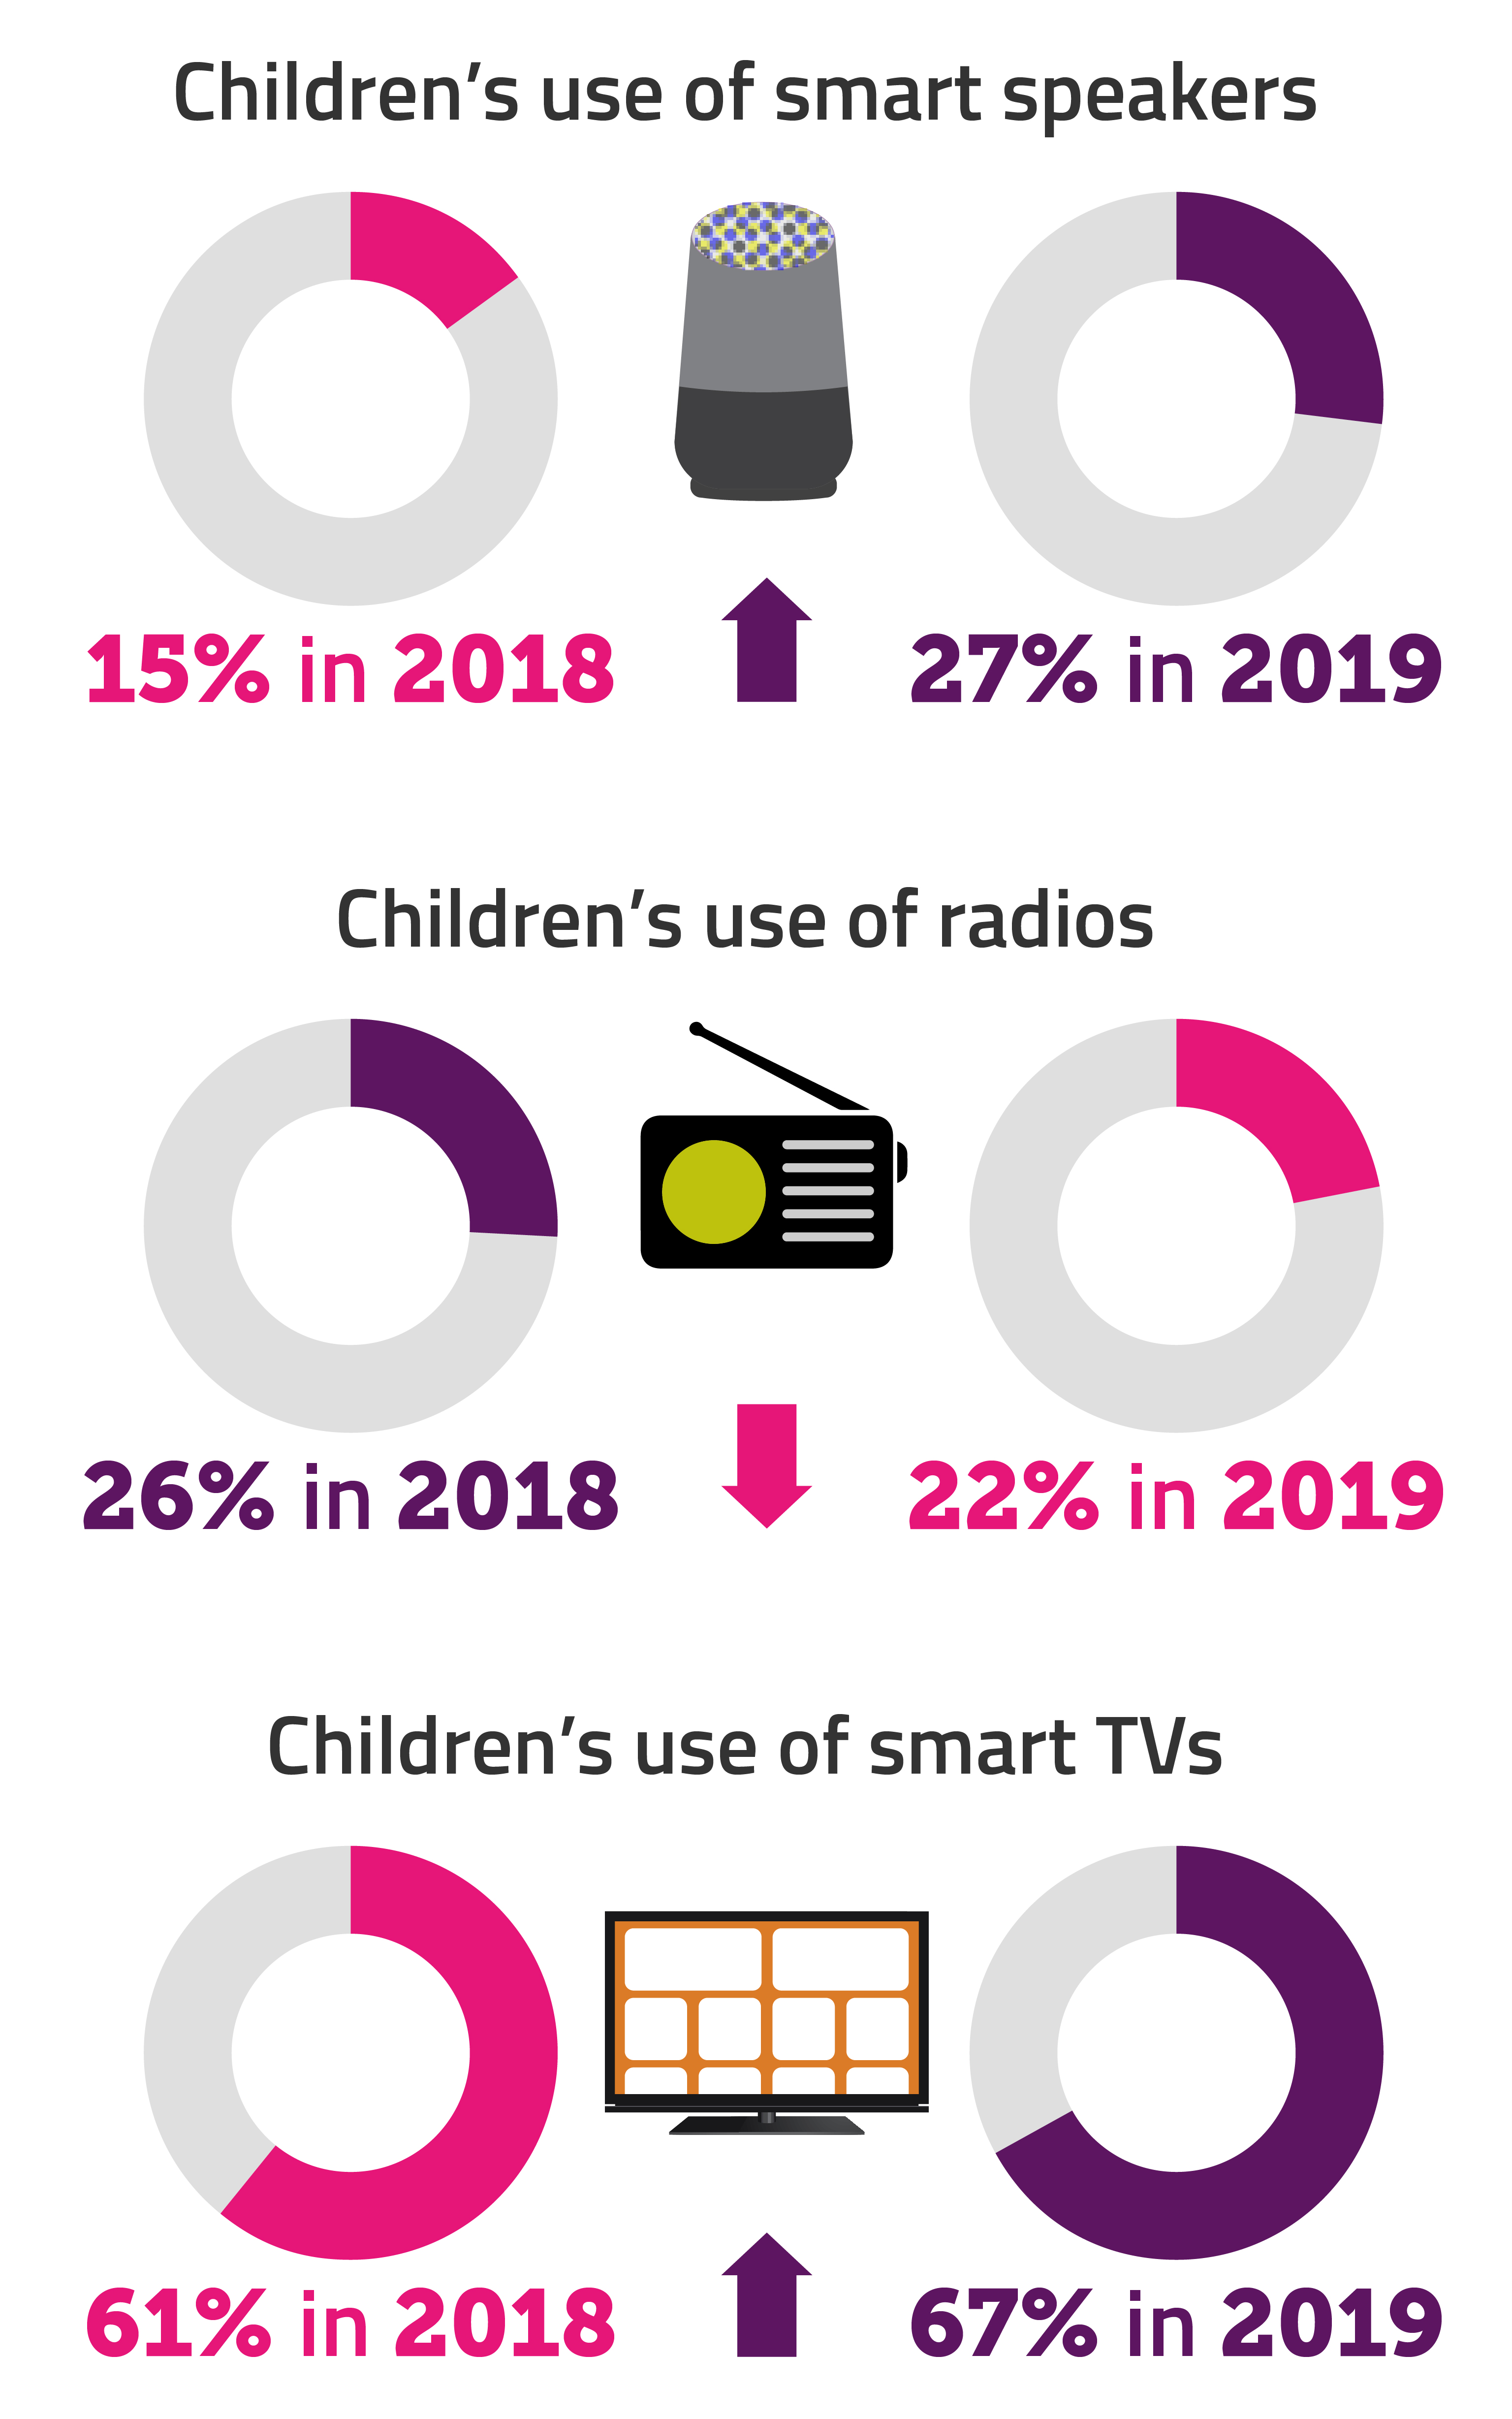 More than a quarter of children now use smart speakers – up from 15% in 2018 – overtaking radios (22%) for the first time. Children’s use of smart TVs also rose from 61% to 67%.